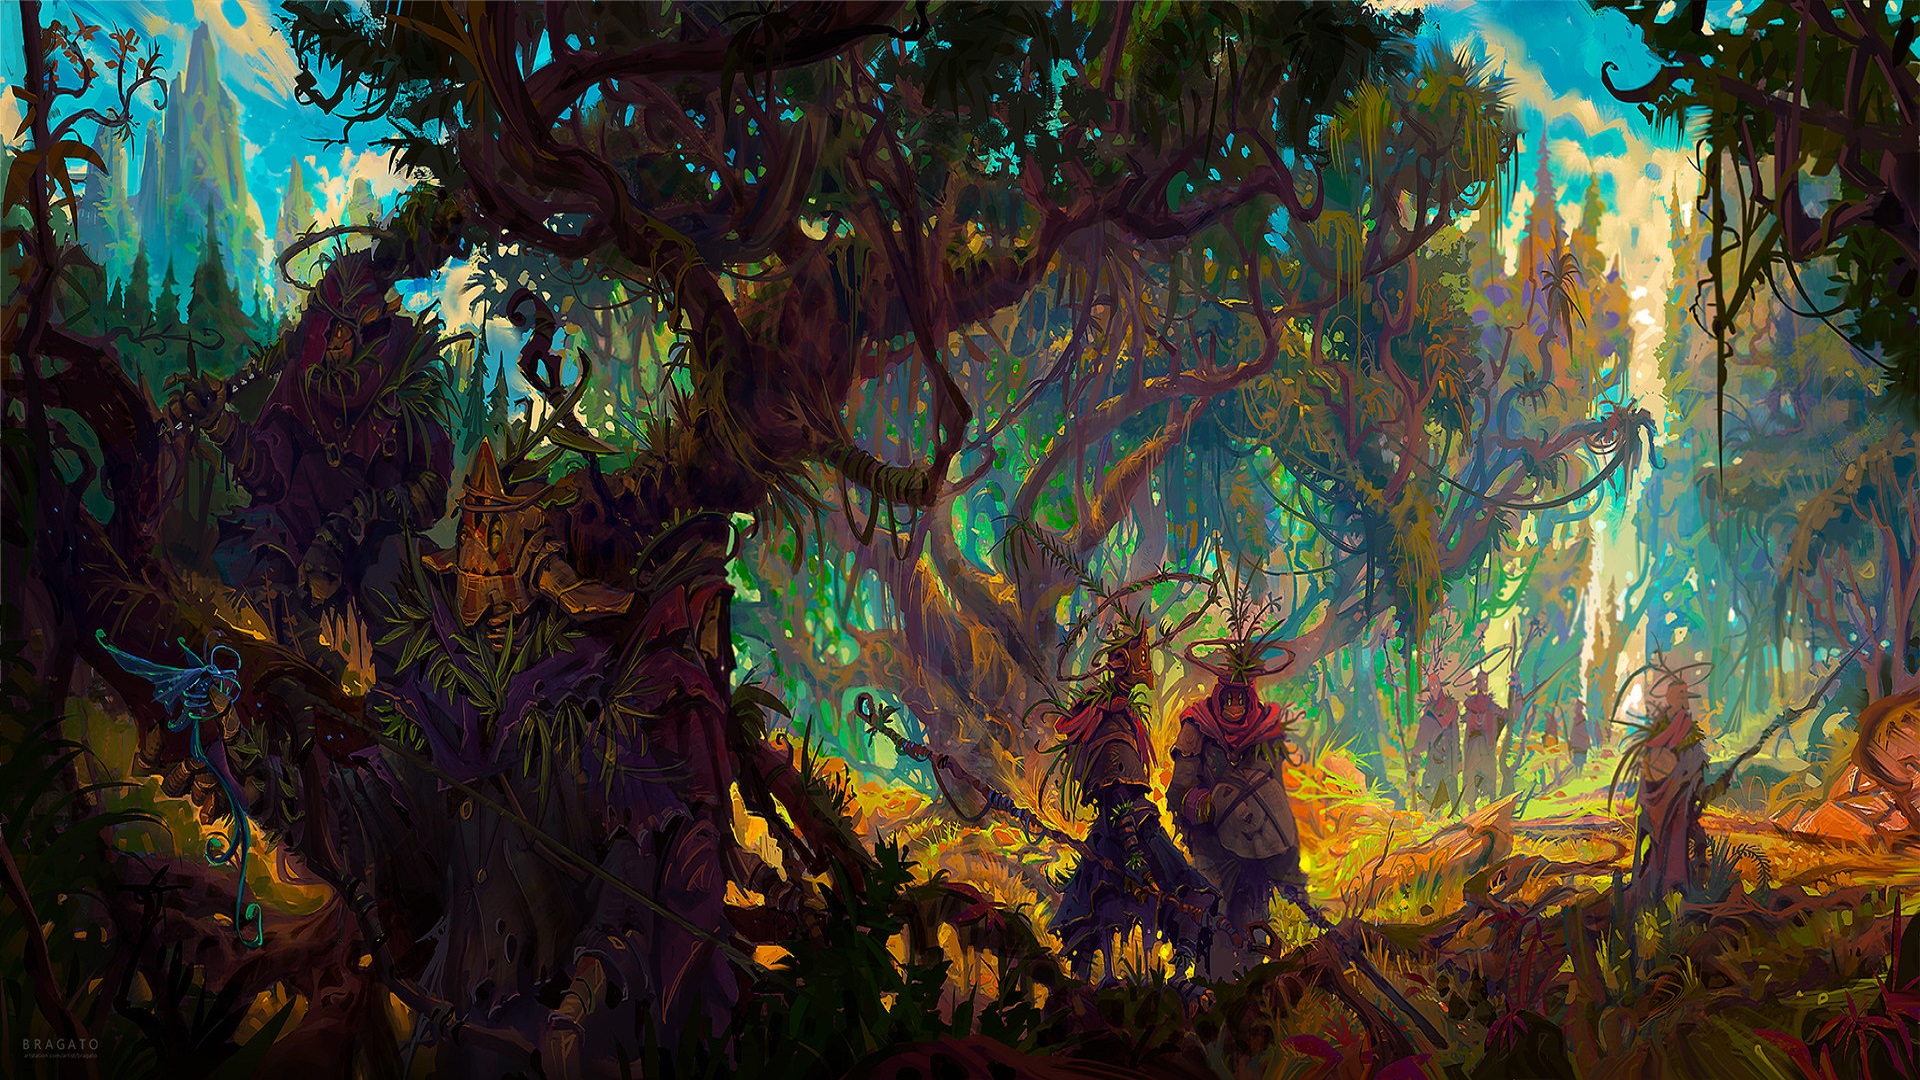 General 1920x1080 colorful forest fantasy art overgrown creature staff druids